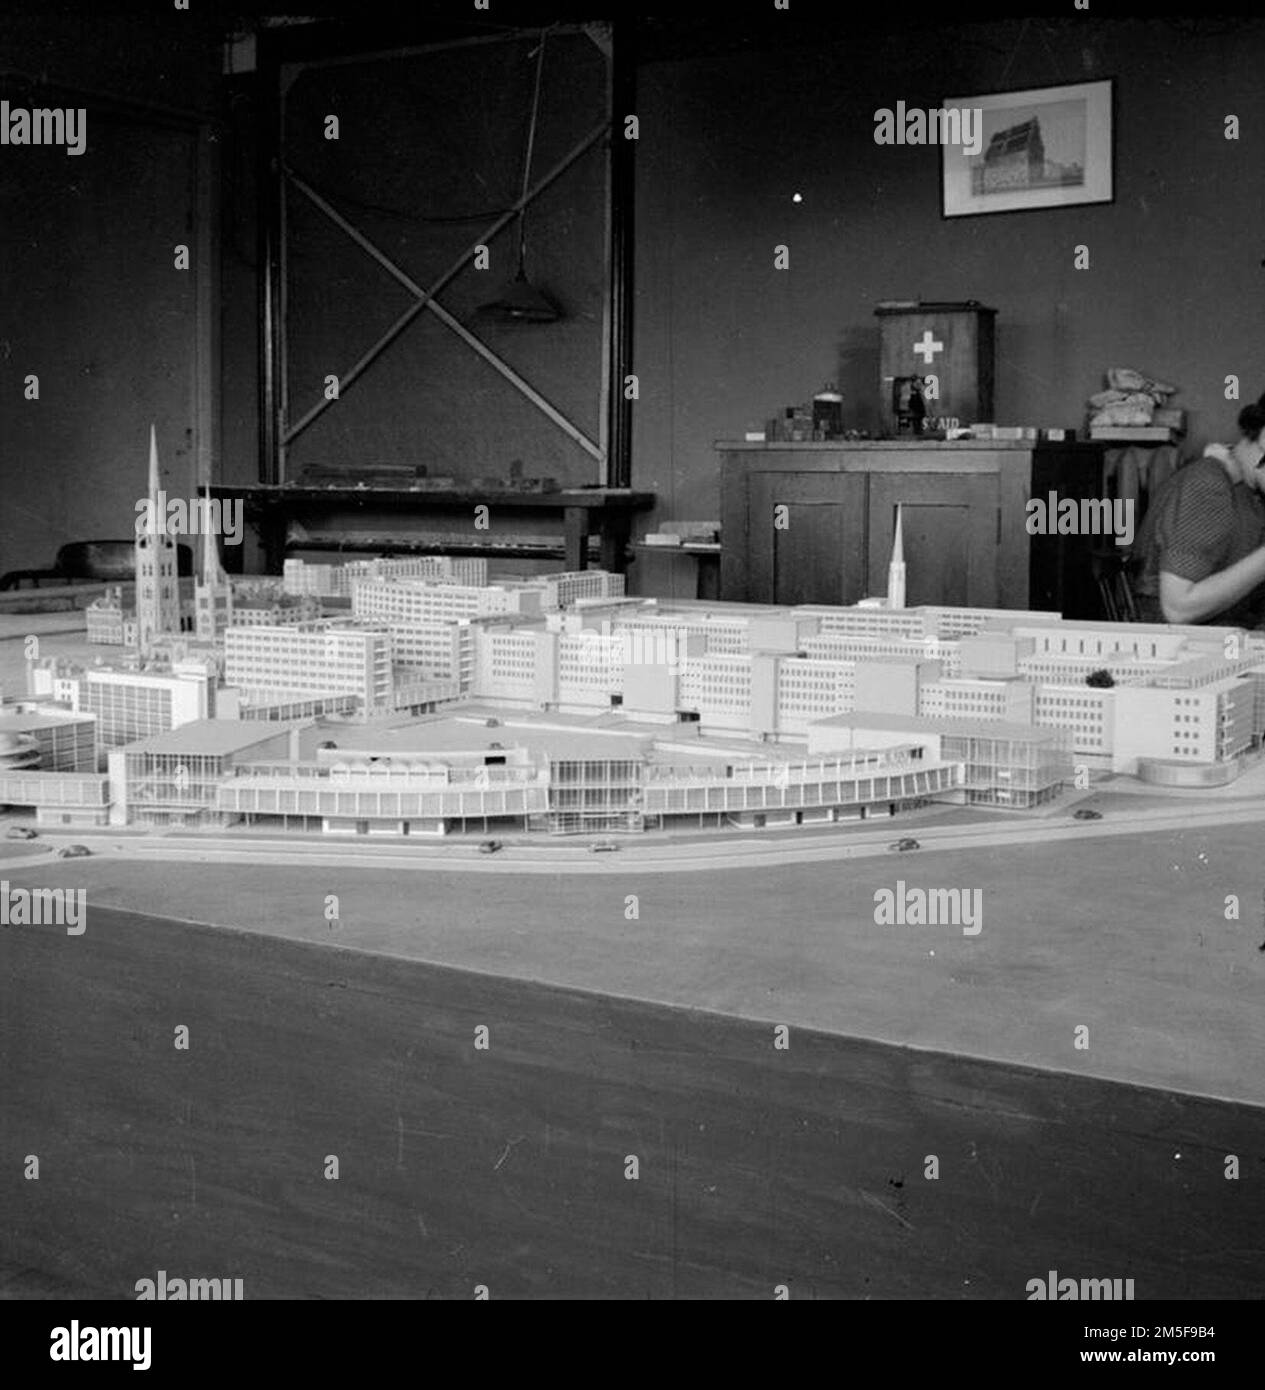 Part of the model prepared to the plans of Donald Gibson (Coventry City Architect) for the post-war rebuilding of Coventry's bomb damaged city centre Stock Photo